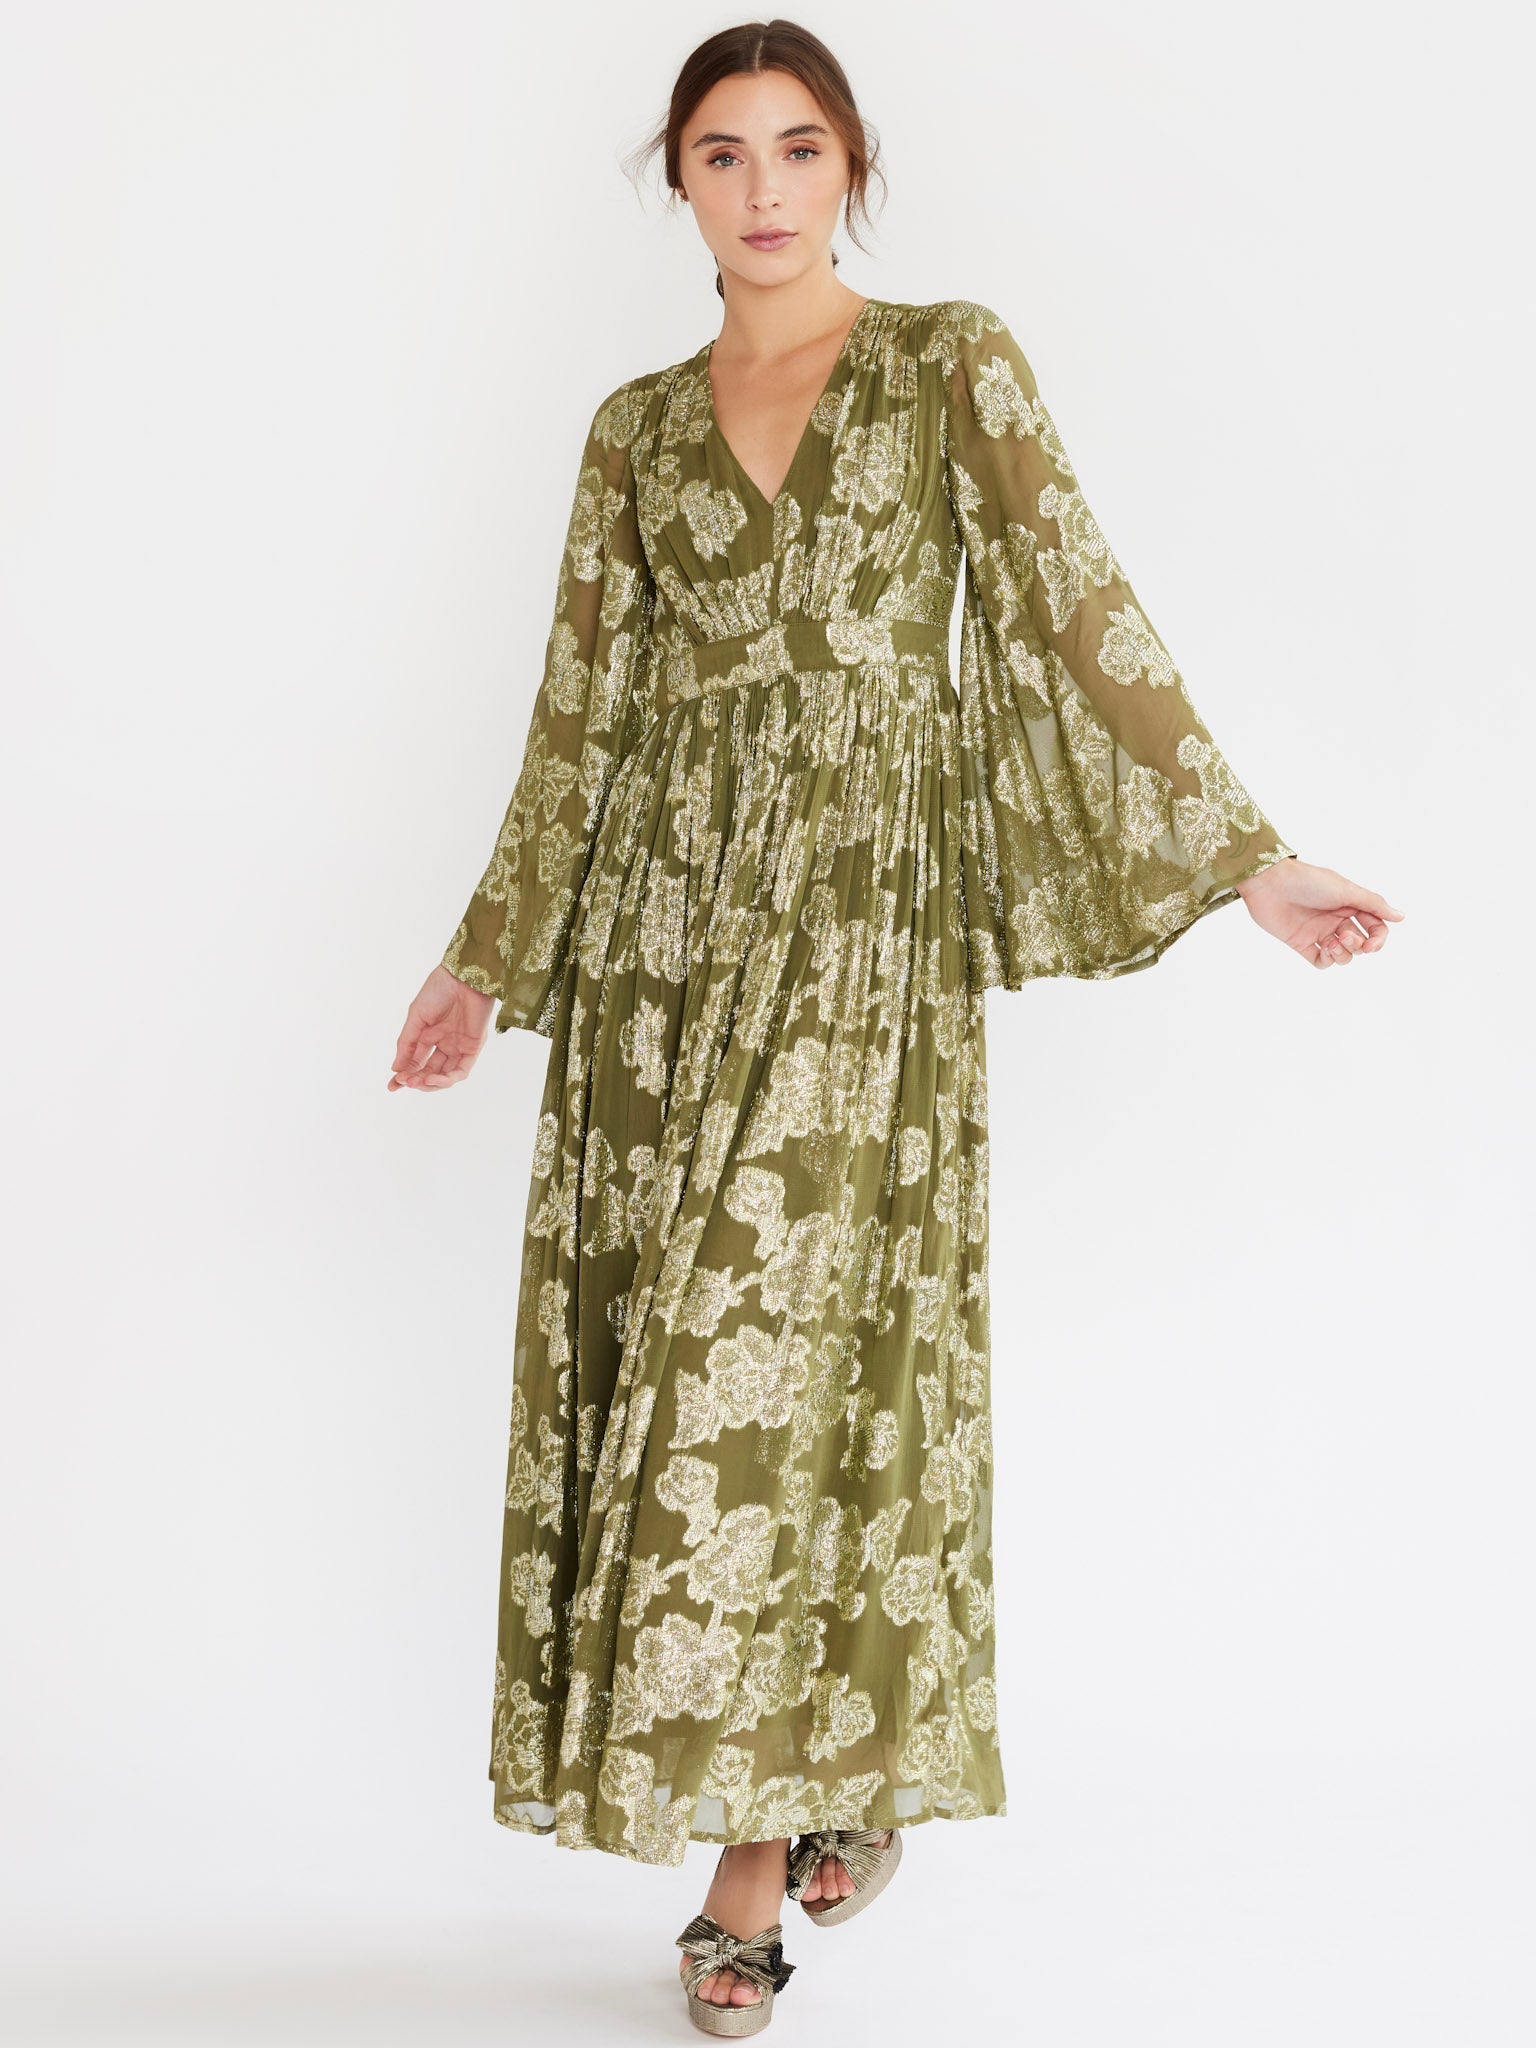 MILLE Clothing Caye Dress in Gold Leaf